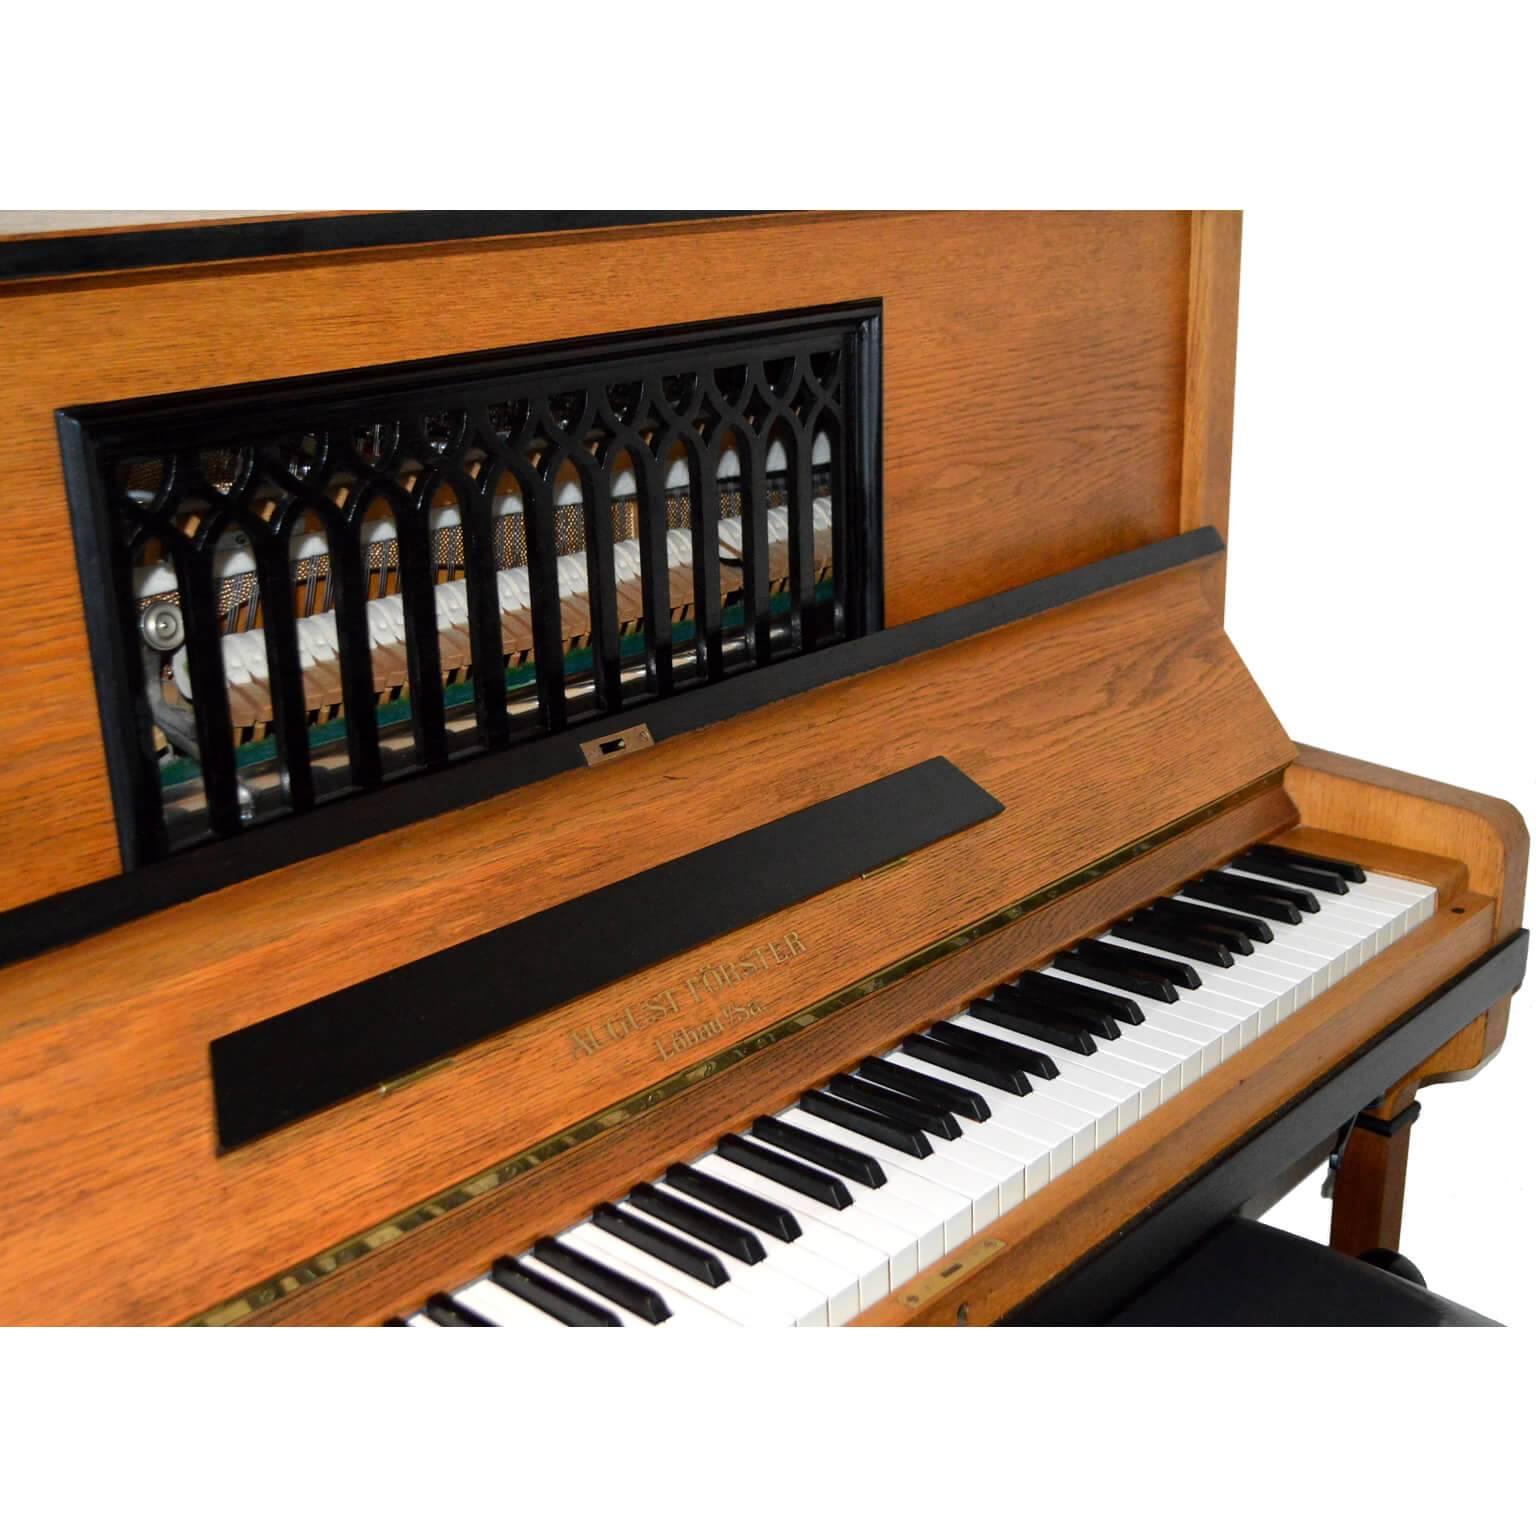 To this day August Forster is one of the world's finest piano makers. Their pianos embody everything that is great in piano making, handcrafted tradition using the finest of materials and processes performed by the best piano making craftsmen. This